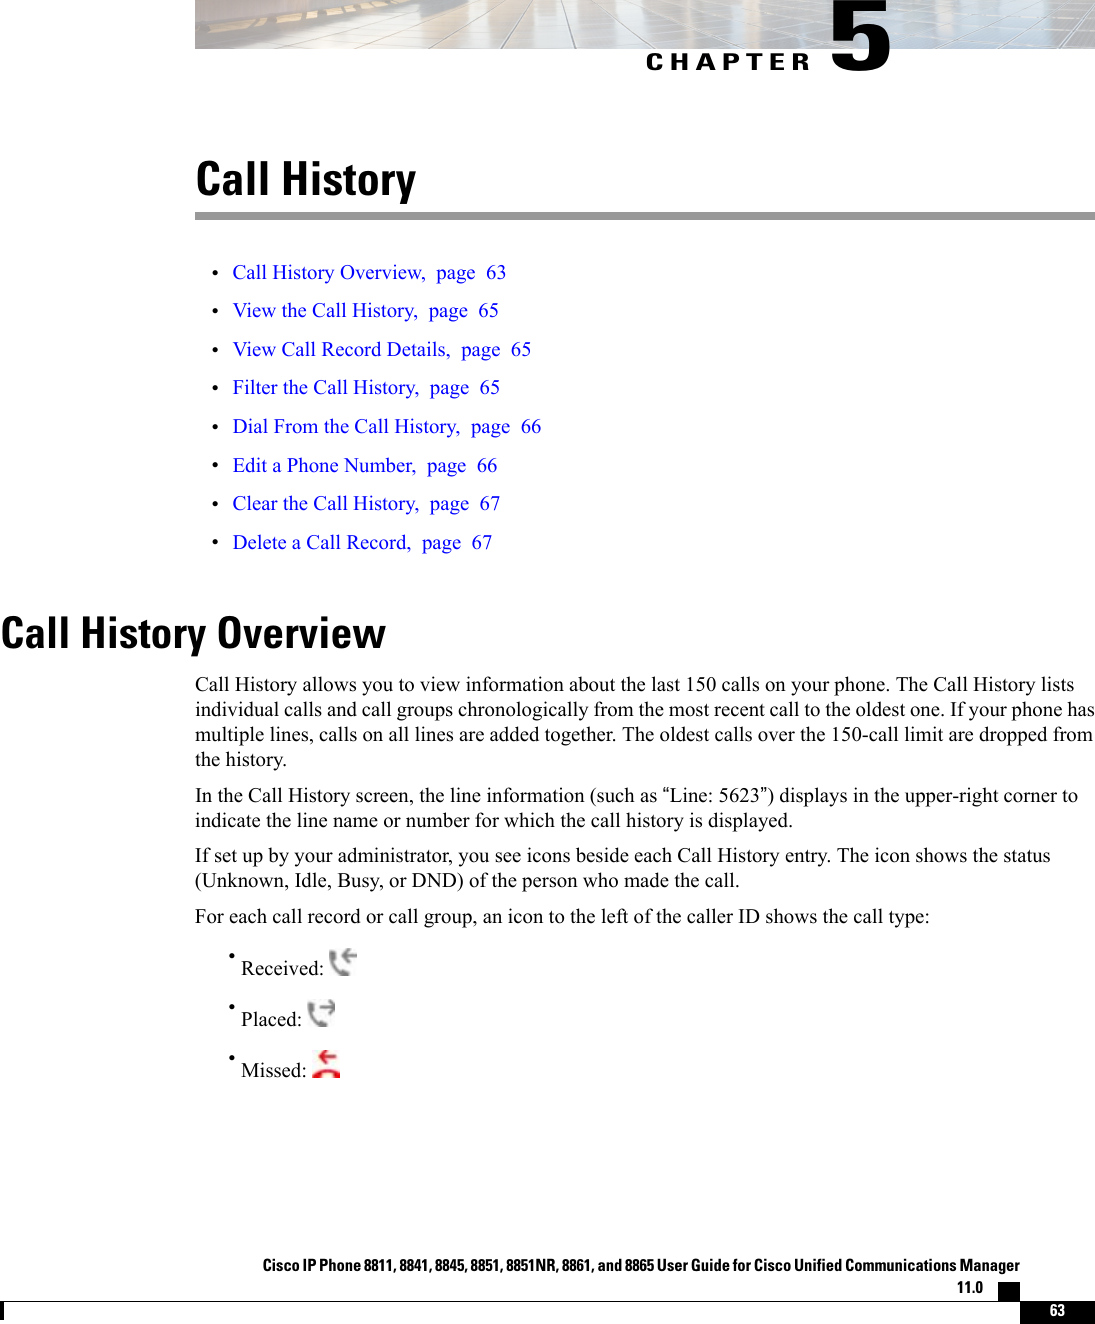 CHAPTER 5Call History•Call History Overview, page 63•View the Call History, page 65•View Call Record Details, page 65•Filter the Call History, page 65•Dial From the Call History, page 66•Edit a Phone Number, page 66•Clear the Call History, page 67•Delete a Call Record, page 67Call History OverviewCall History allows you to view information about the last 150 calls on your phone. The Call History listsindividual calls and call groups chronologically from the most recent call to the oldest one. If your phone hasmultiple lines, calls on all lines are added together. The oldest calls over the 150-call limit are dropped fromthe history.In the Call History screen, the line information (such as “Line: 5623”) displays in the upper-right corner toindicate the line name or number for which the call history is displayed.If set up by your administrator, you see icons beside each Call History entry. The icon shows the status(Unknown, Idle, Busy, or DND) of the person who made the call.For each call record or call group, an icon to the left of the caller ID shows the call type:•Received:•Placed:•Missed:Cisco IP Phone 8811, 8841, 8845, 8851, 8851NR, 8861, and 8865 User Guide for Cisco Unified Communications Manager11.0    63